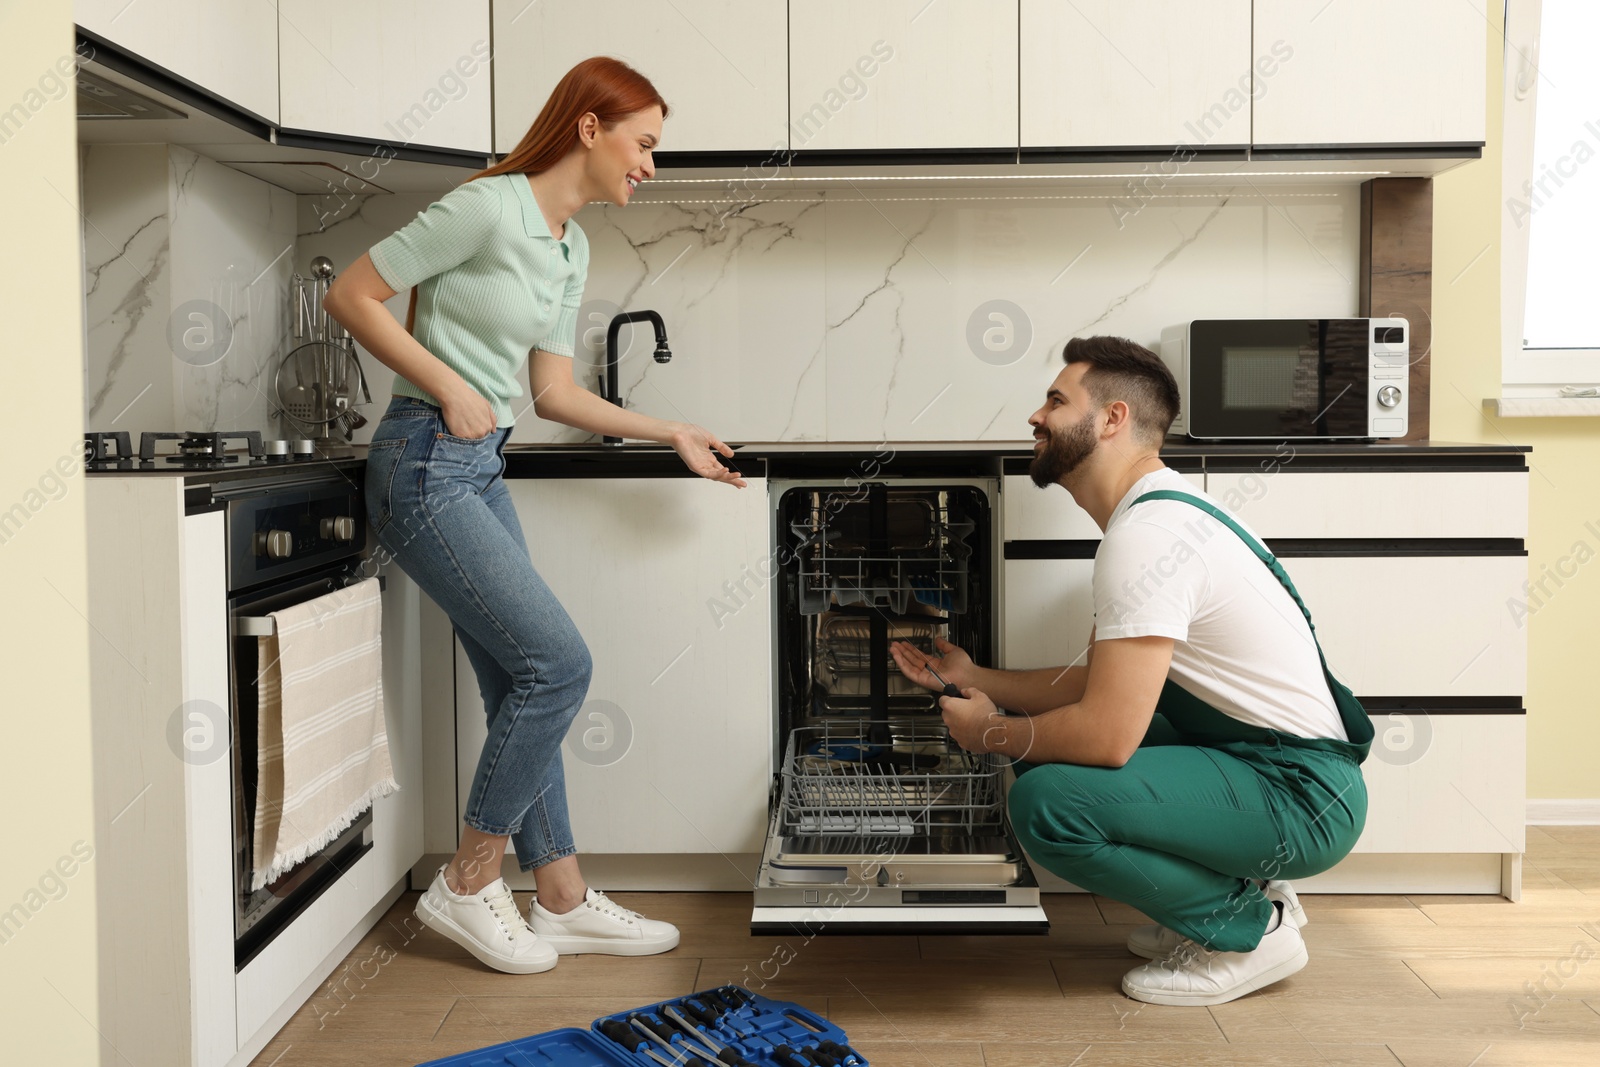 Photo of Smiling woman discussing with repairman near dishwasher in kitchen